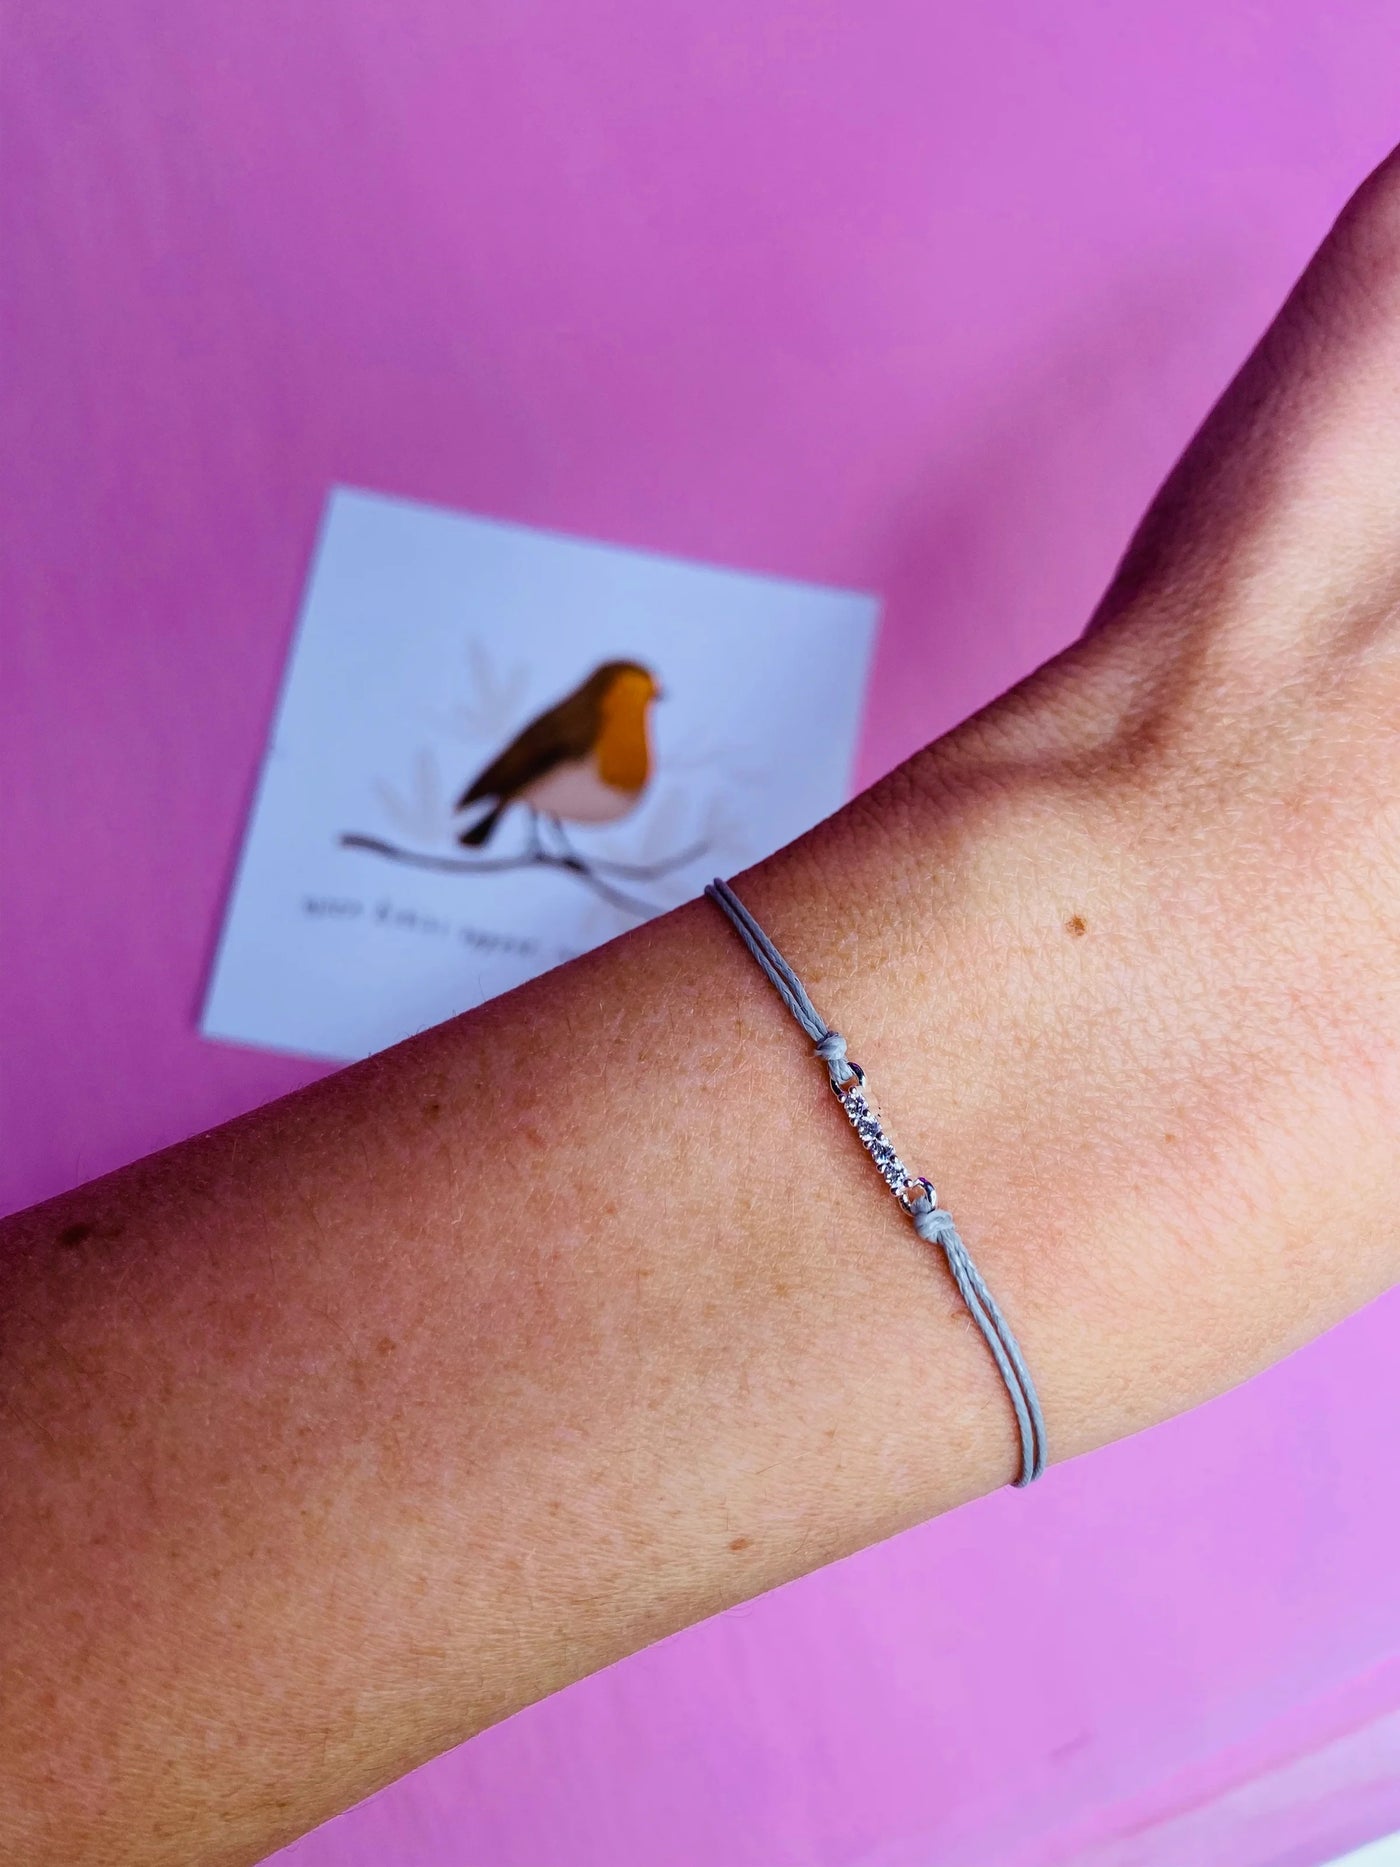 Letterbox Love Pave Cord Bracelet - When Robins Appear, Loved Ones Are Near